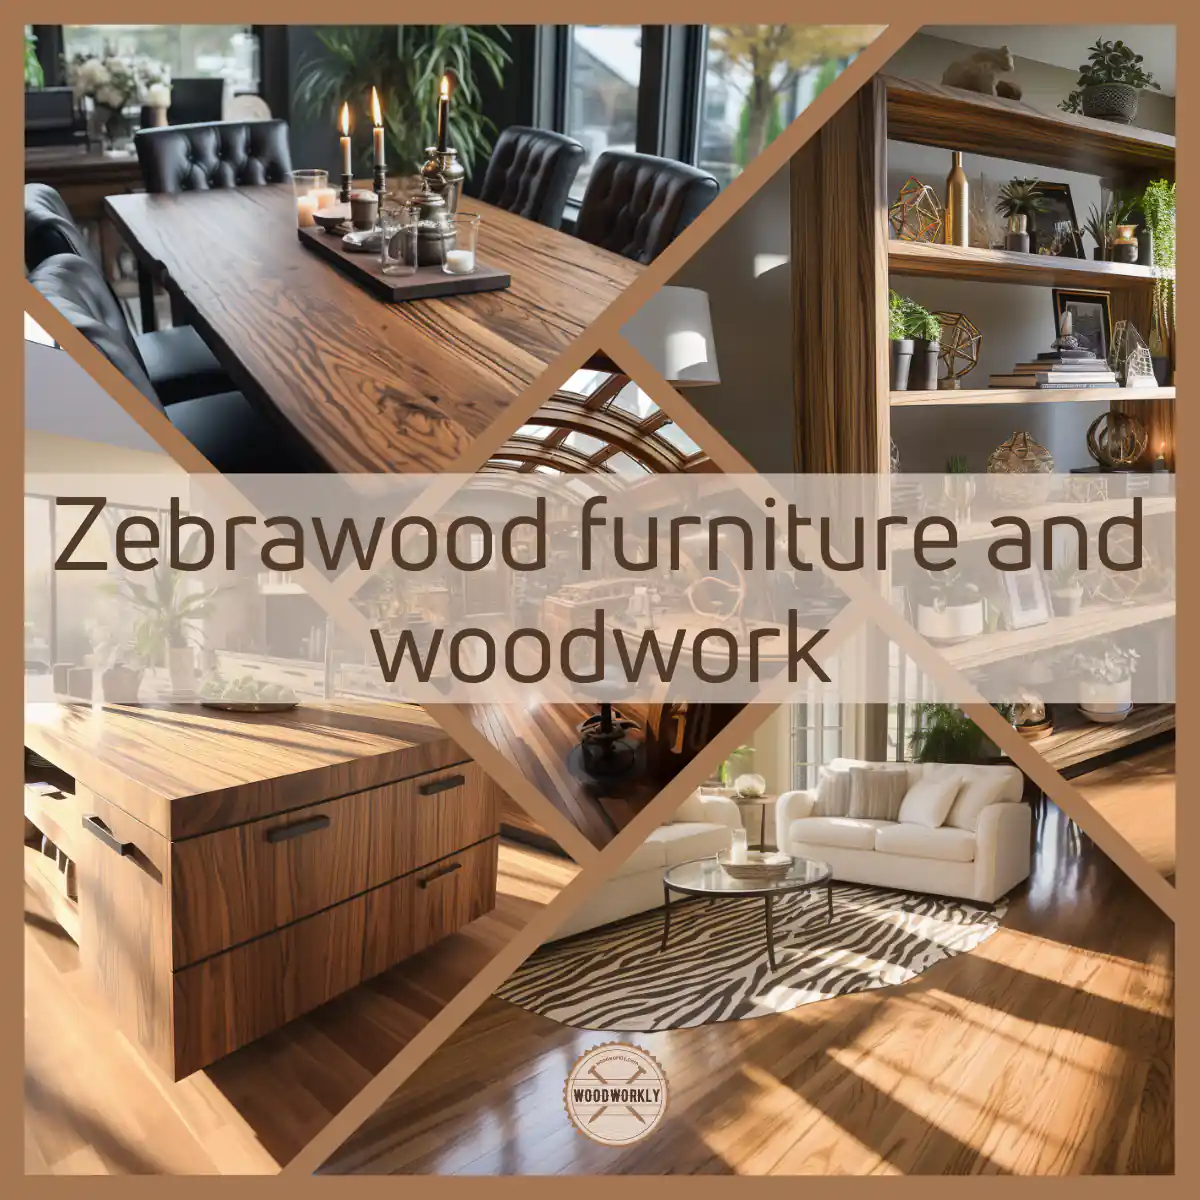 Zebrawood furniture and woodwork